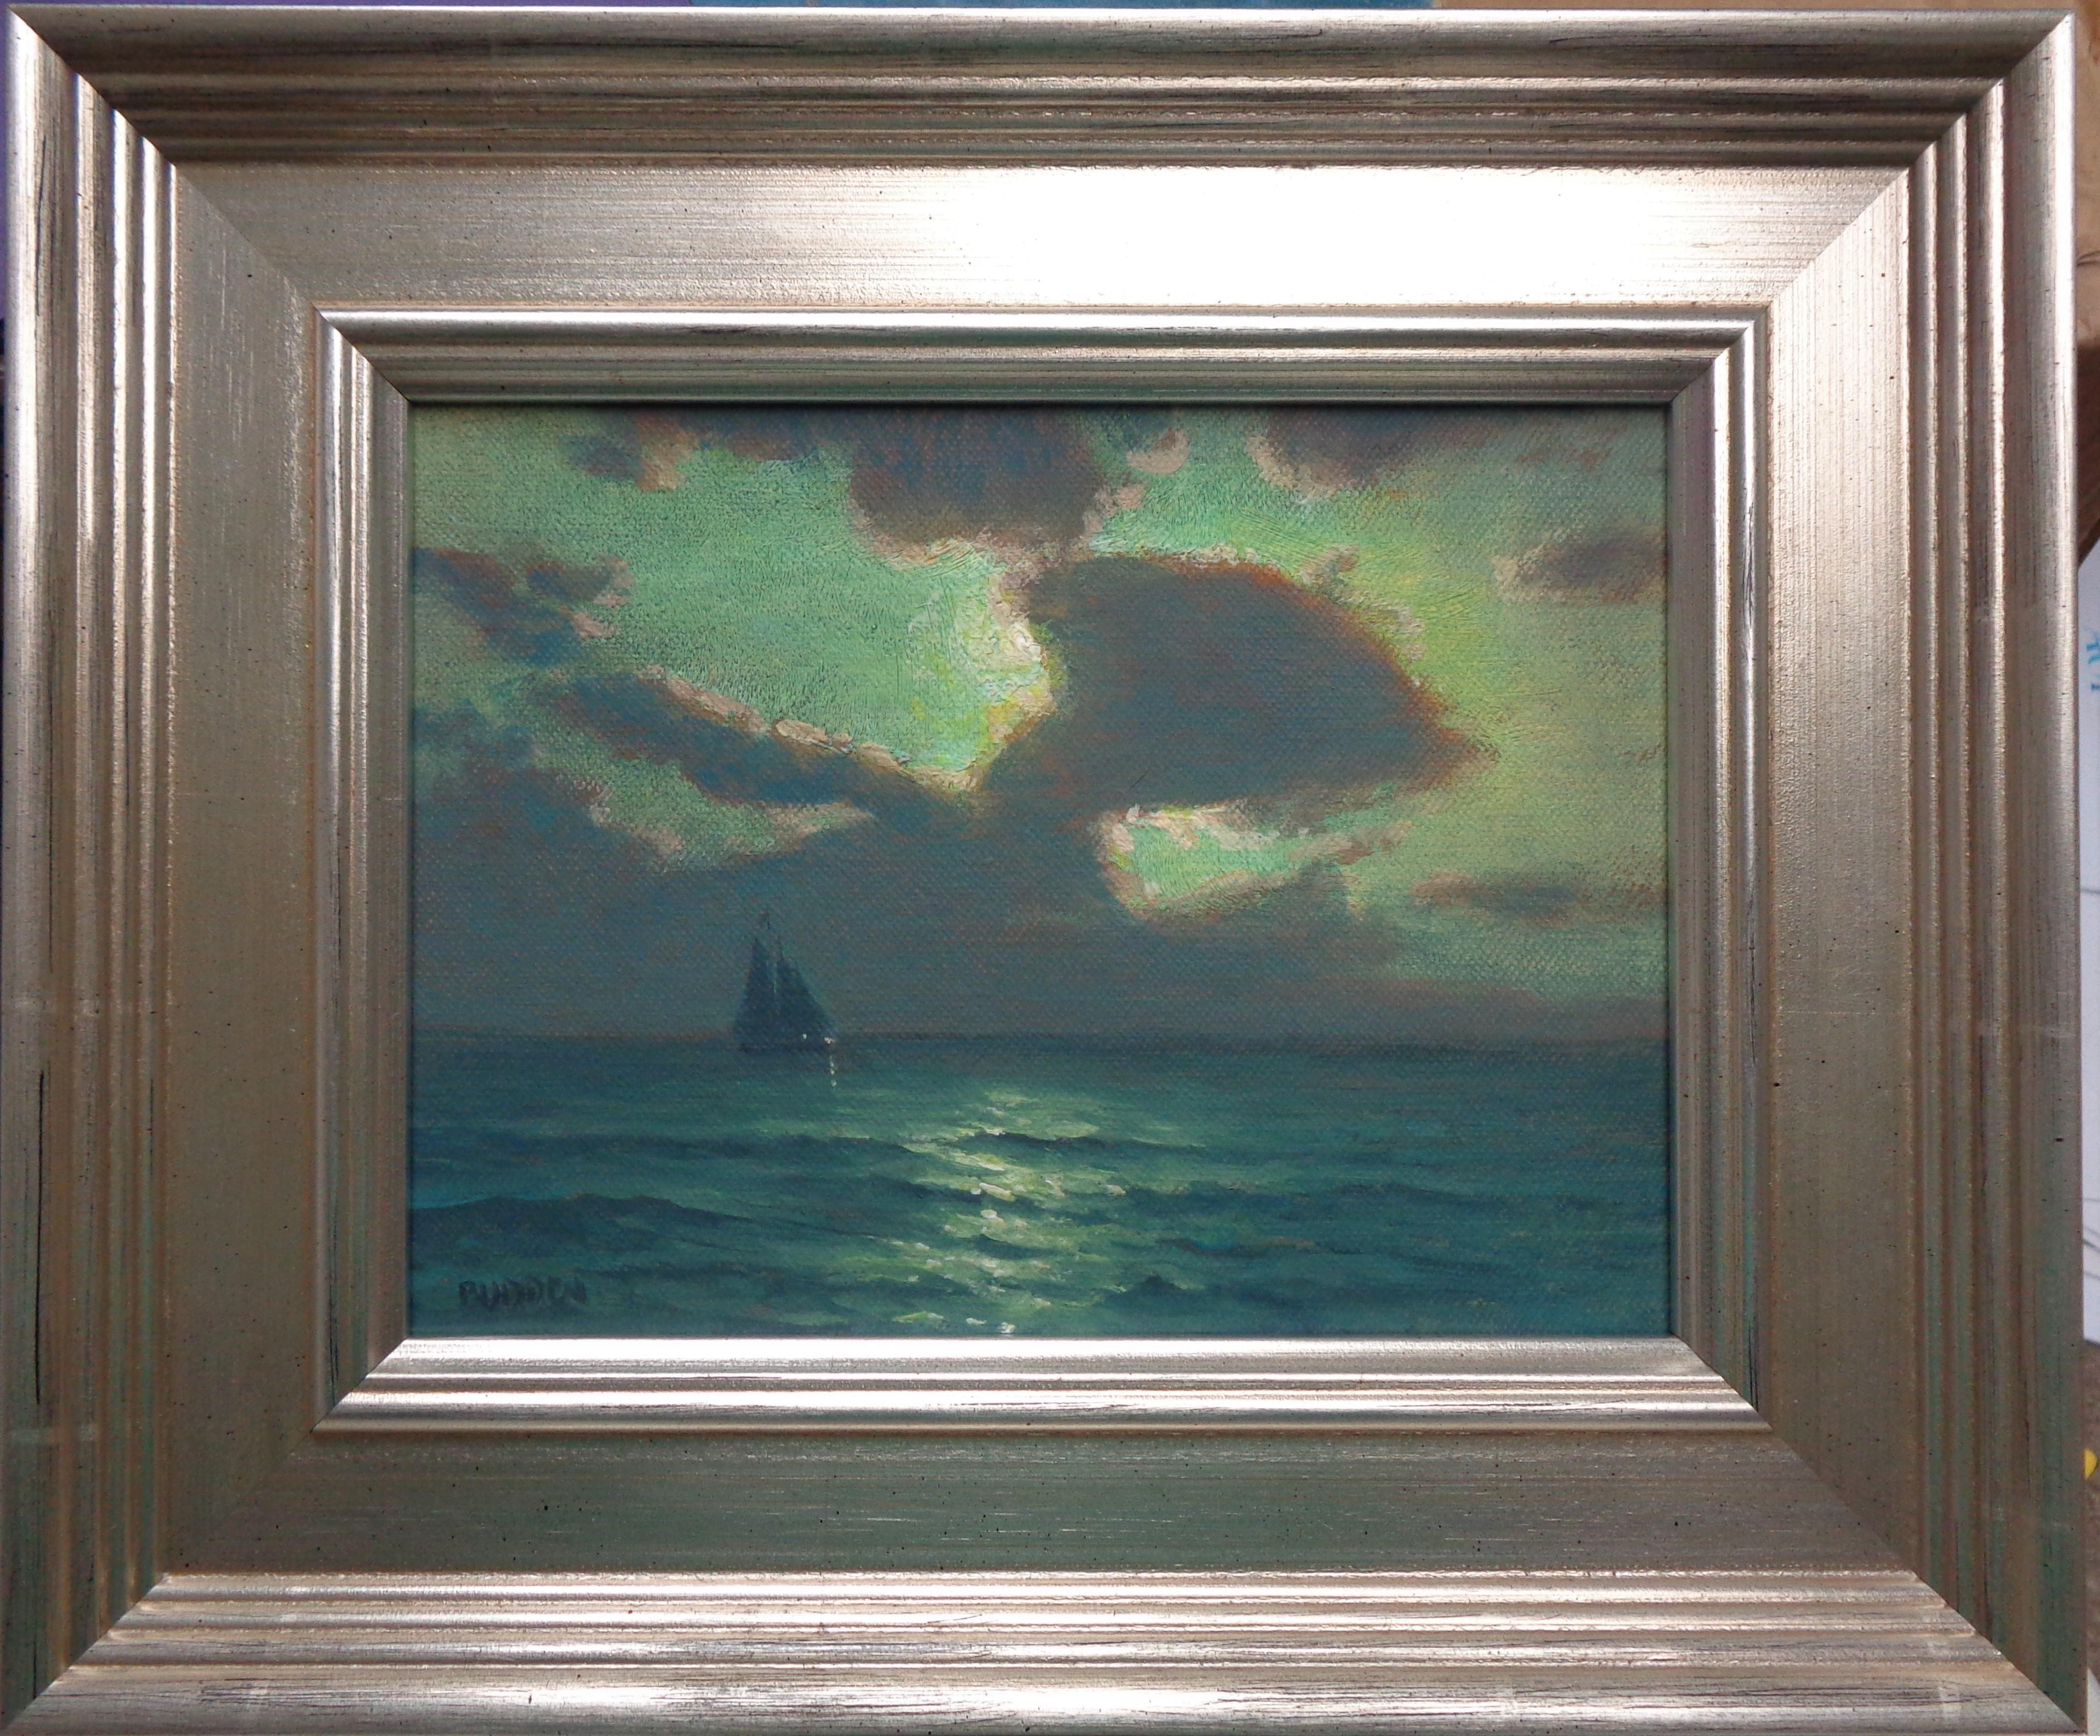  Moonrise  Sailing II
oil/panel 6 x 8 image
 Moonrise Sailing II is an oil painting on canvas panel by award winning contemporary artist Michael Budden that showcases a uniquely beautiful moonlit view of the ocean. This painting is part of a series